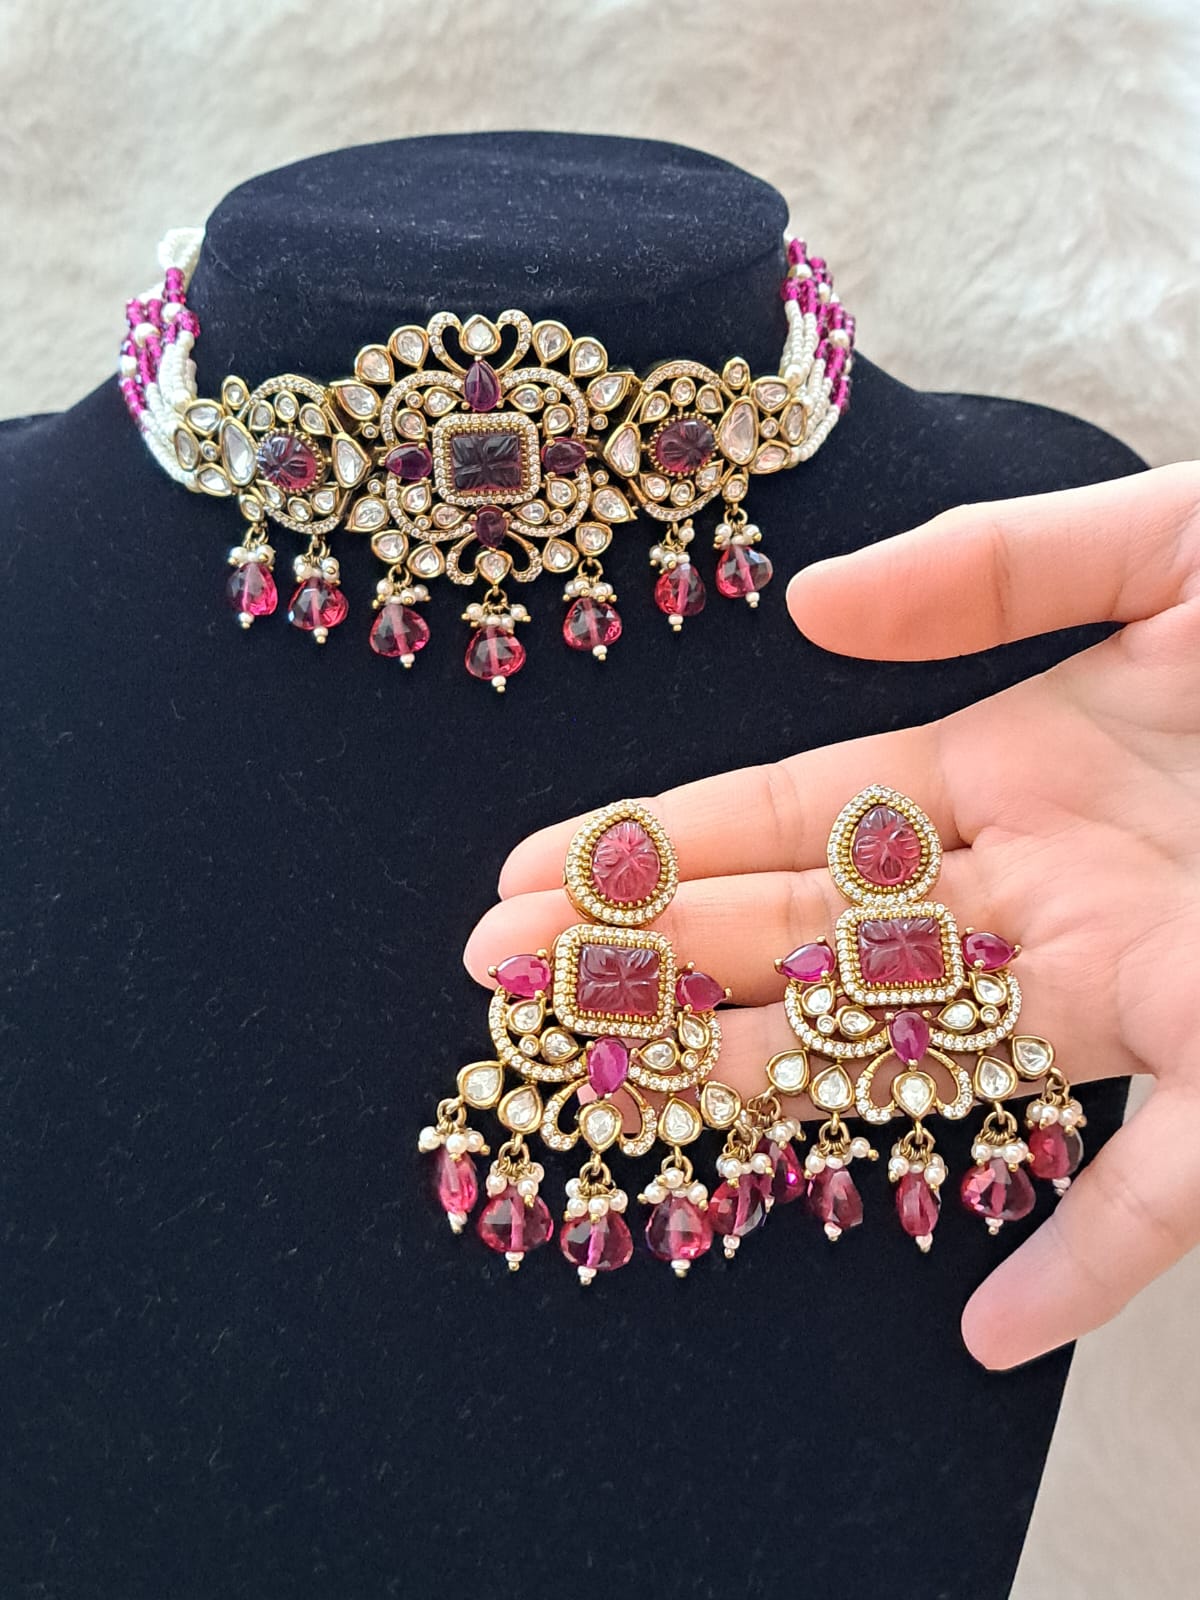 Victoria(mehndi)polish choker set with carved stones,kundans,,pearls and hydro-beads